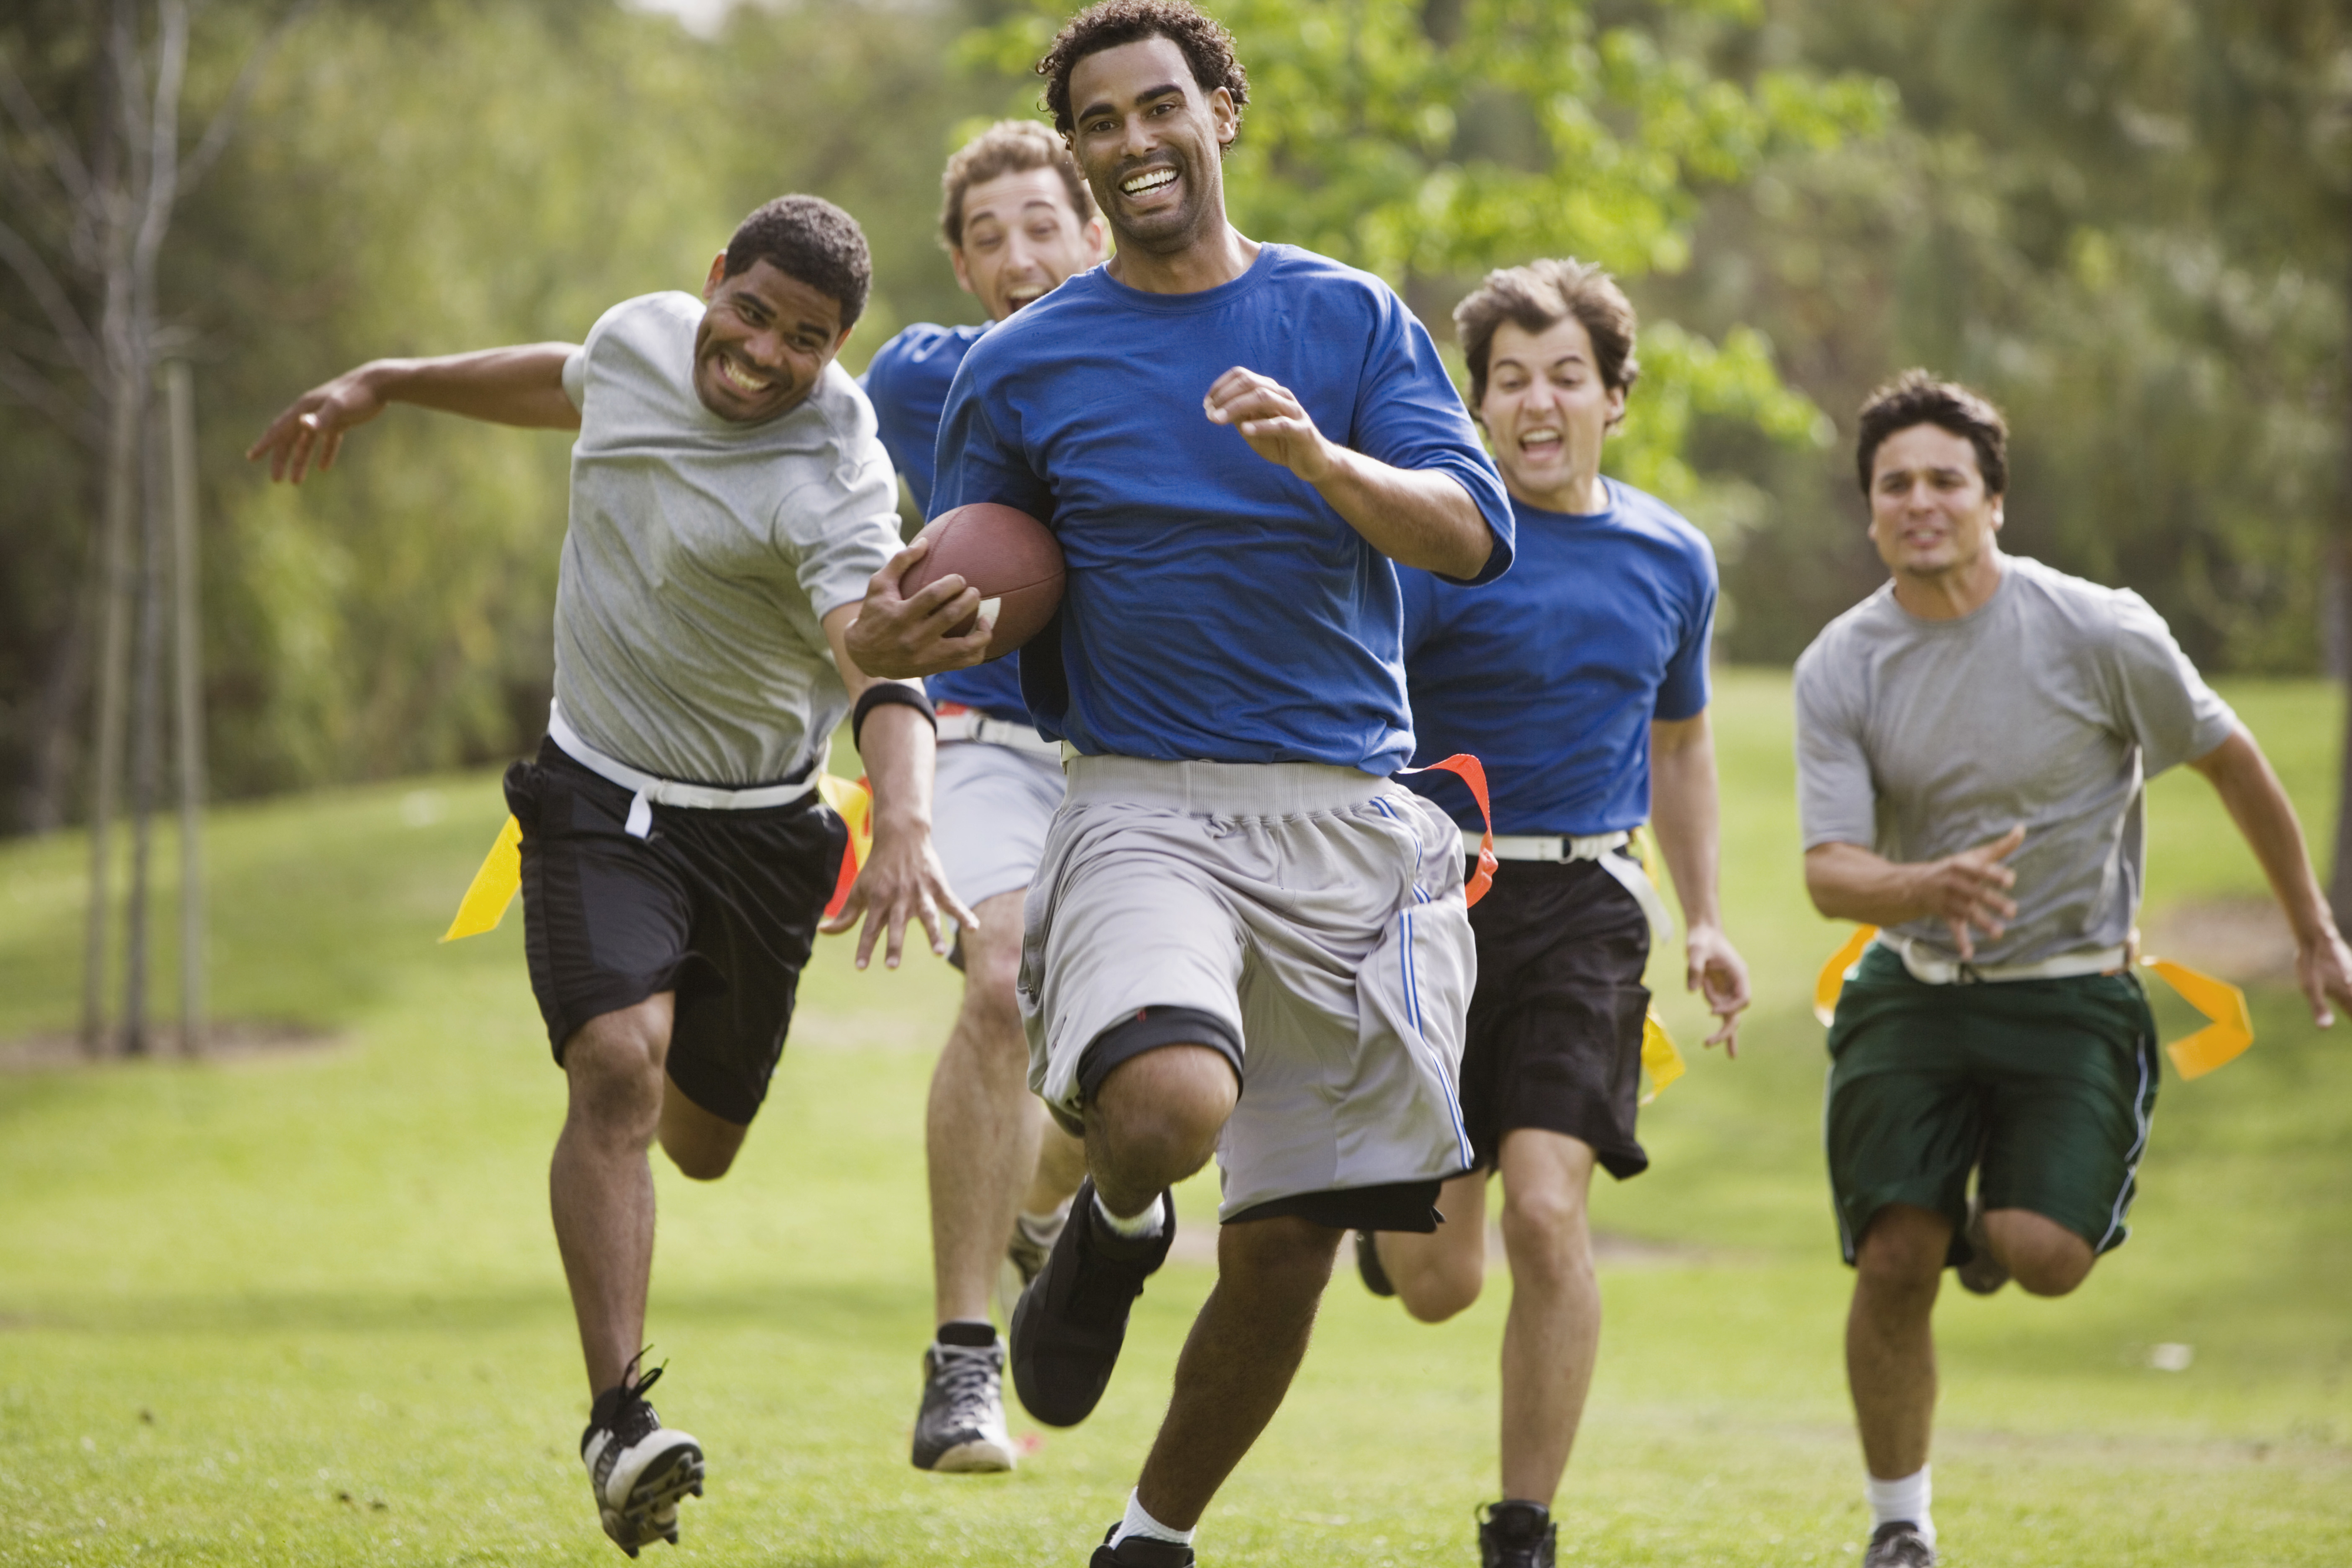 A group of five men playing flag football in a park, with one man holding the football and running while others chase him, all smiling and appearing to have fun